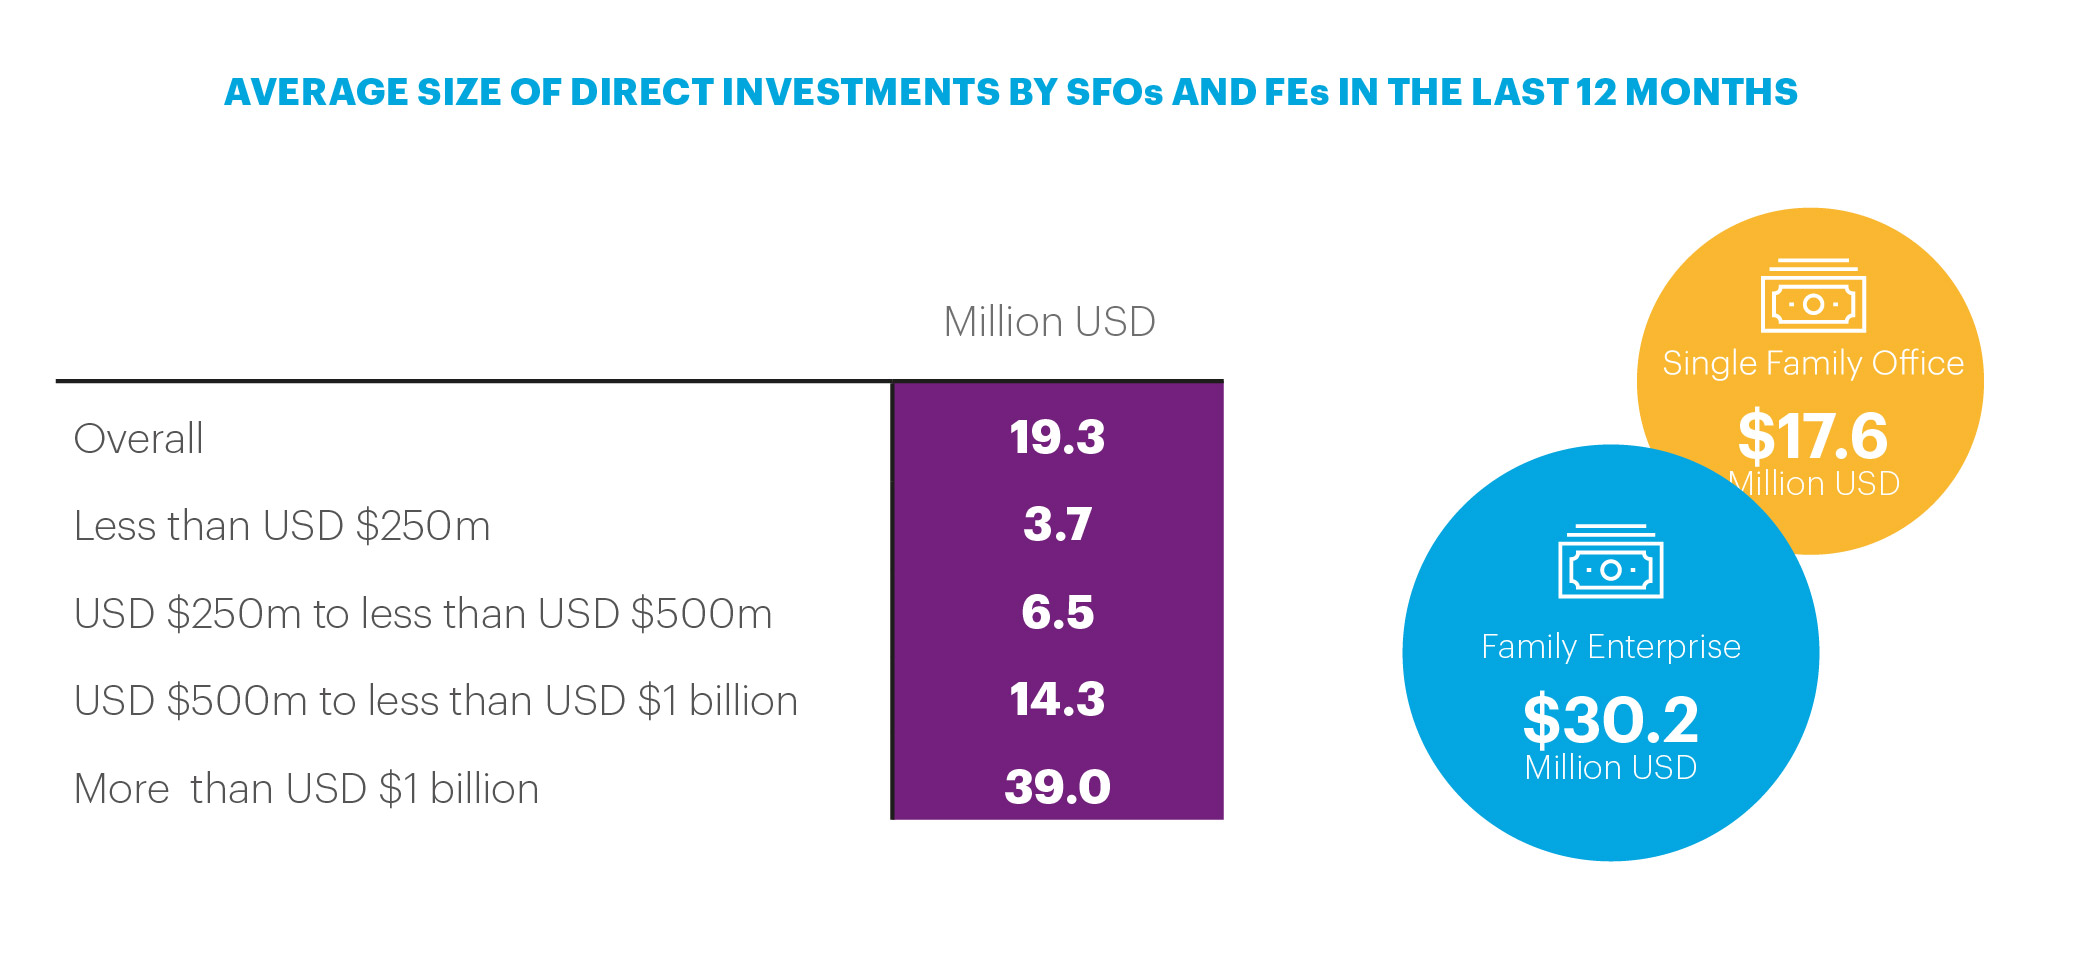 Average size of direct investments by SFOs and FEs in the last 12 months